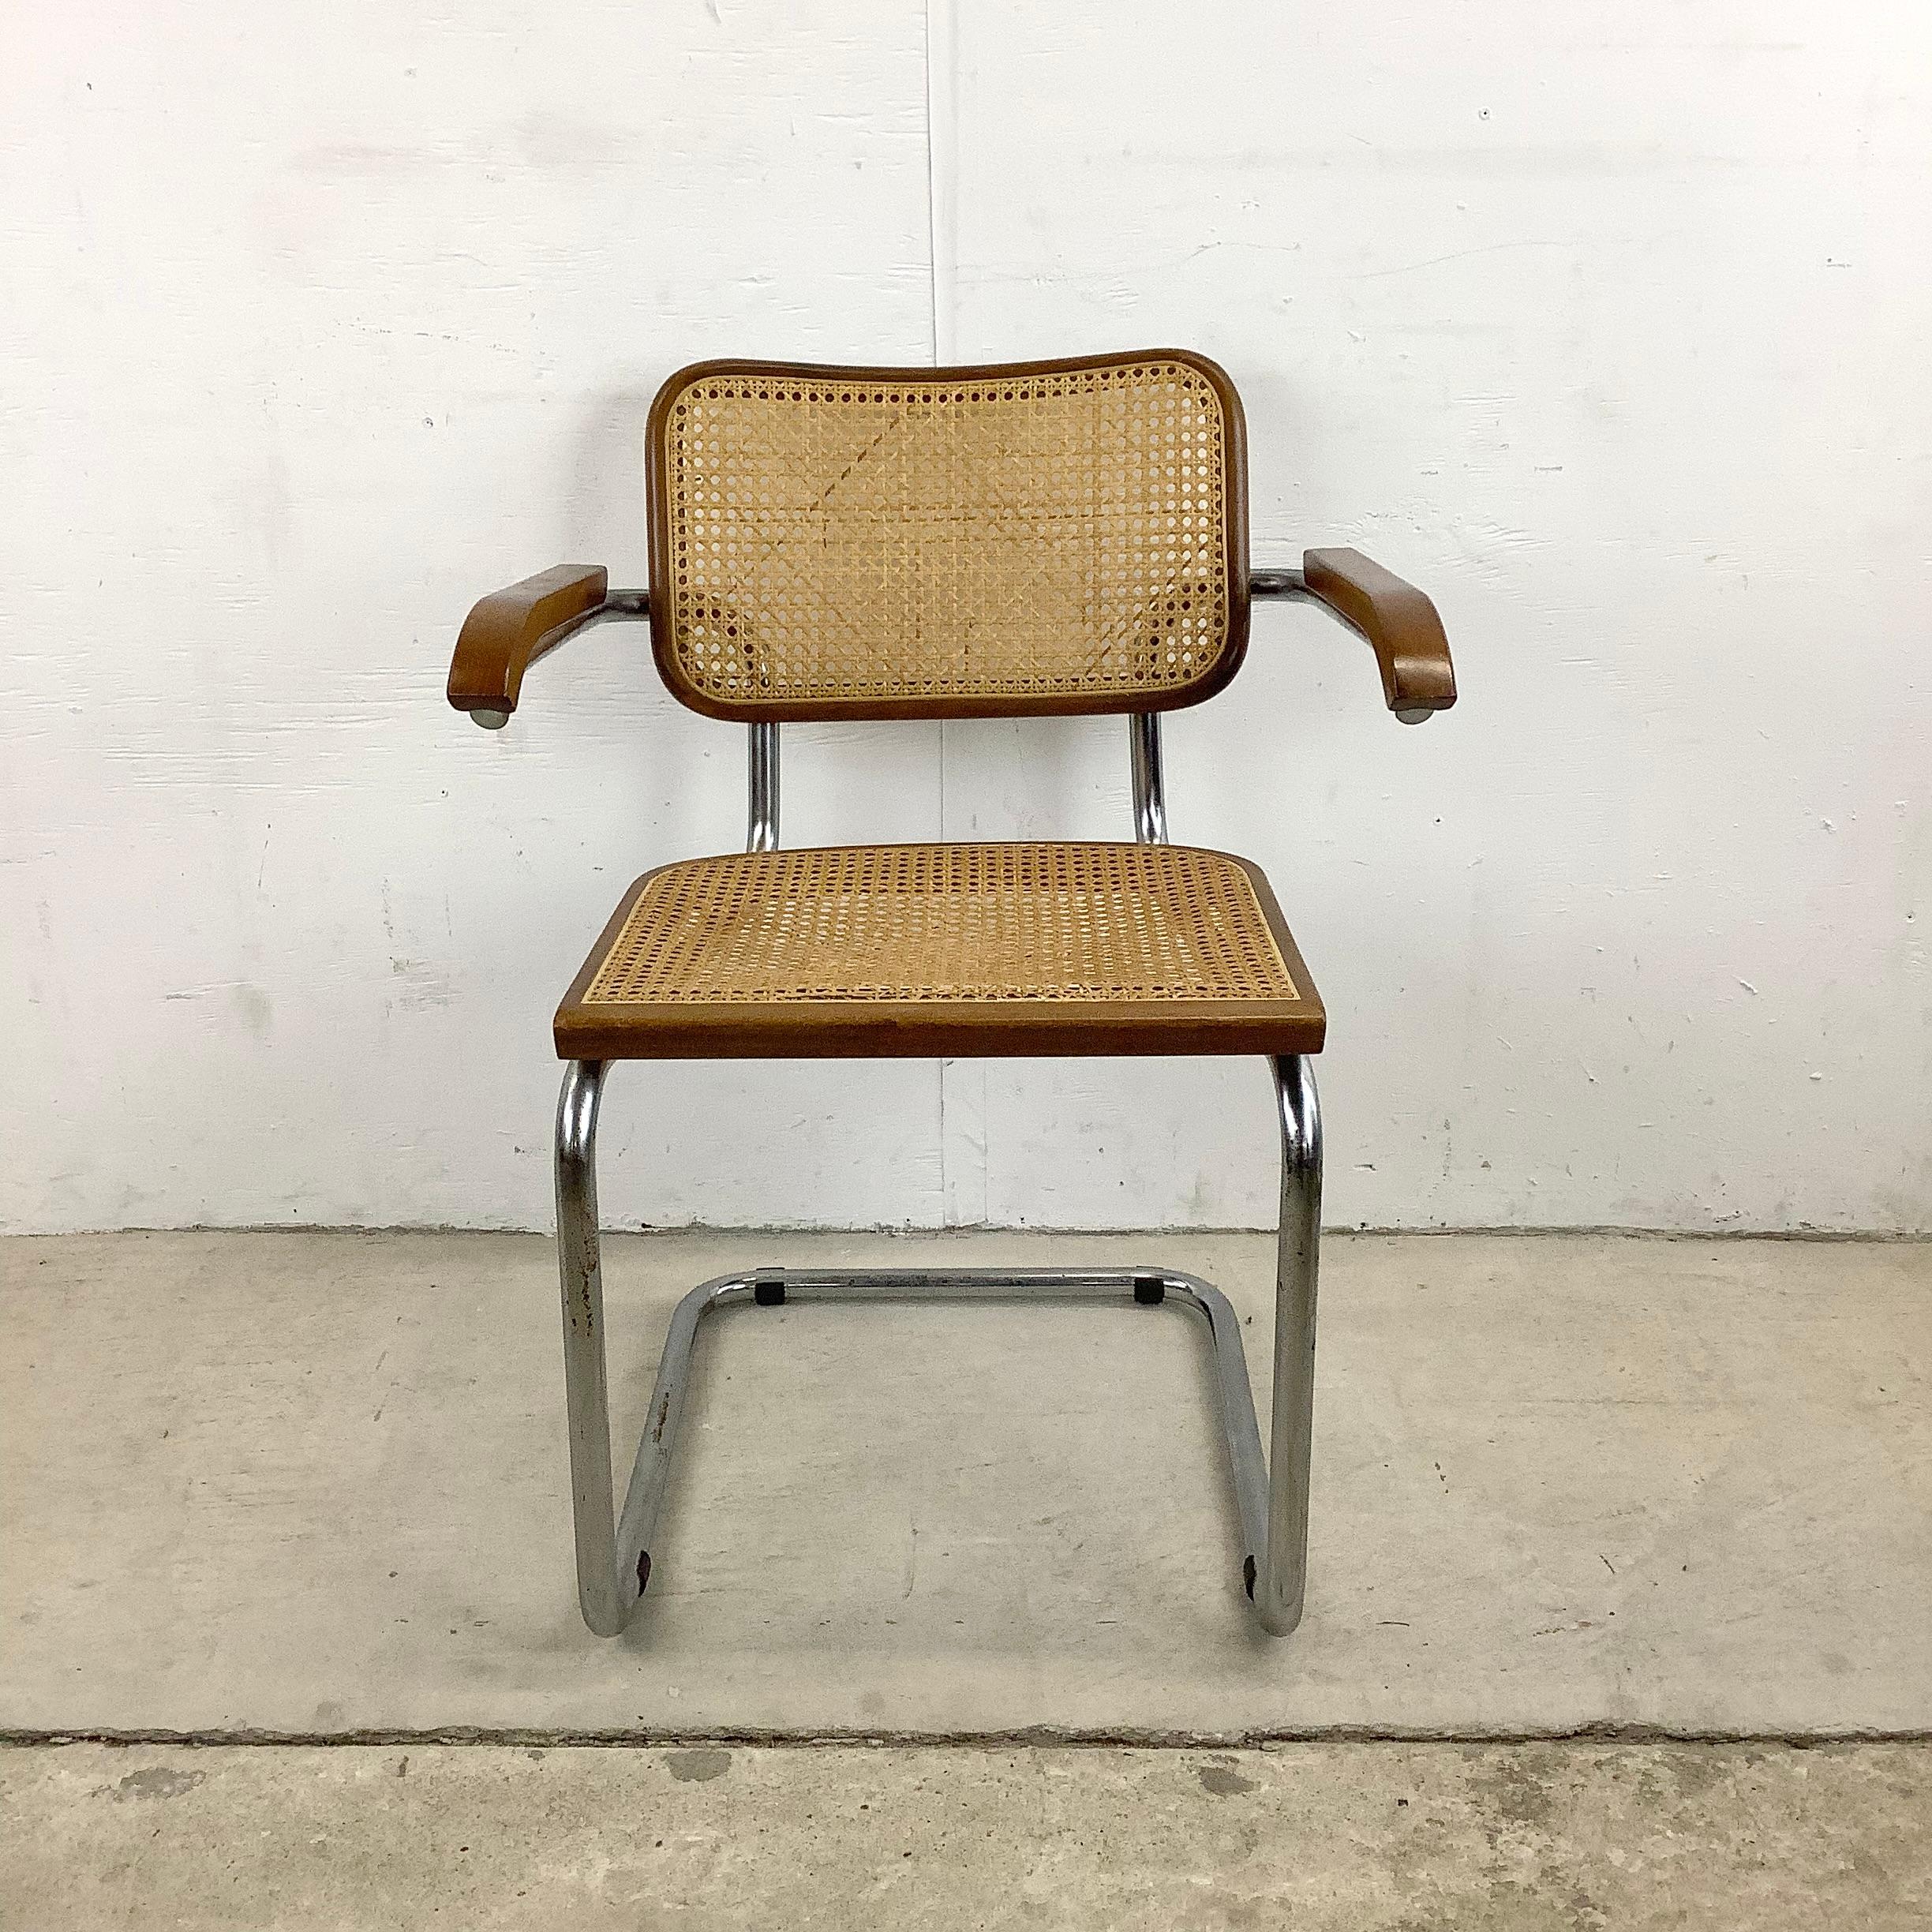 Mid-Century Modern Midcentury Cesca Style Cane Seat Dining Chair, Made in Italy